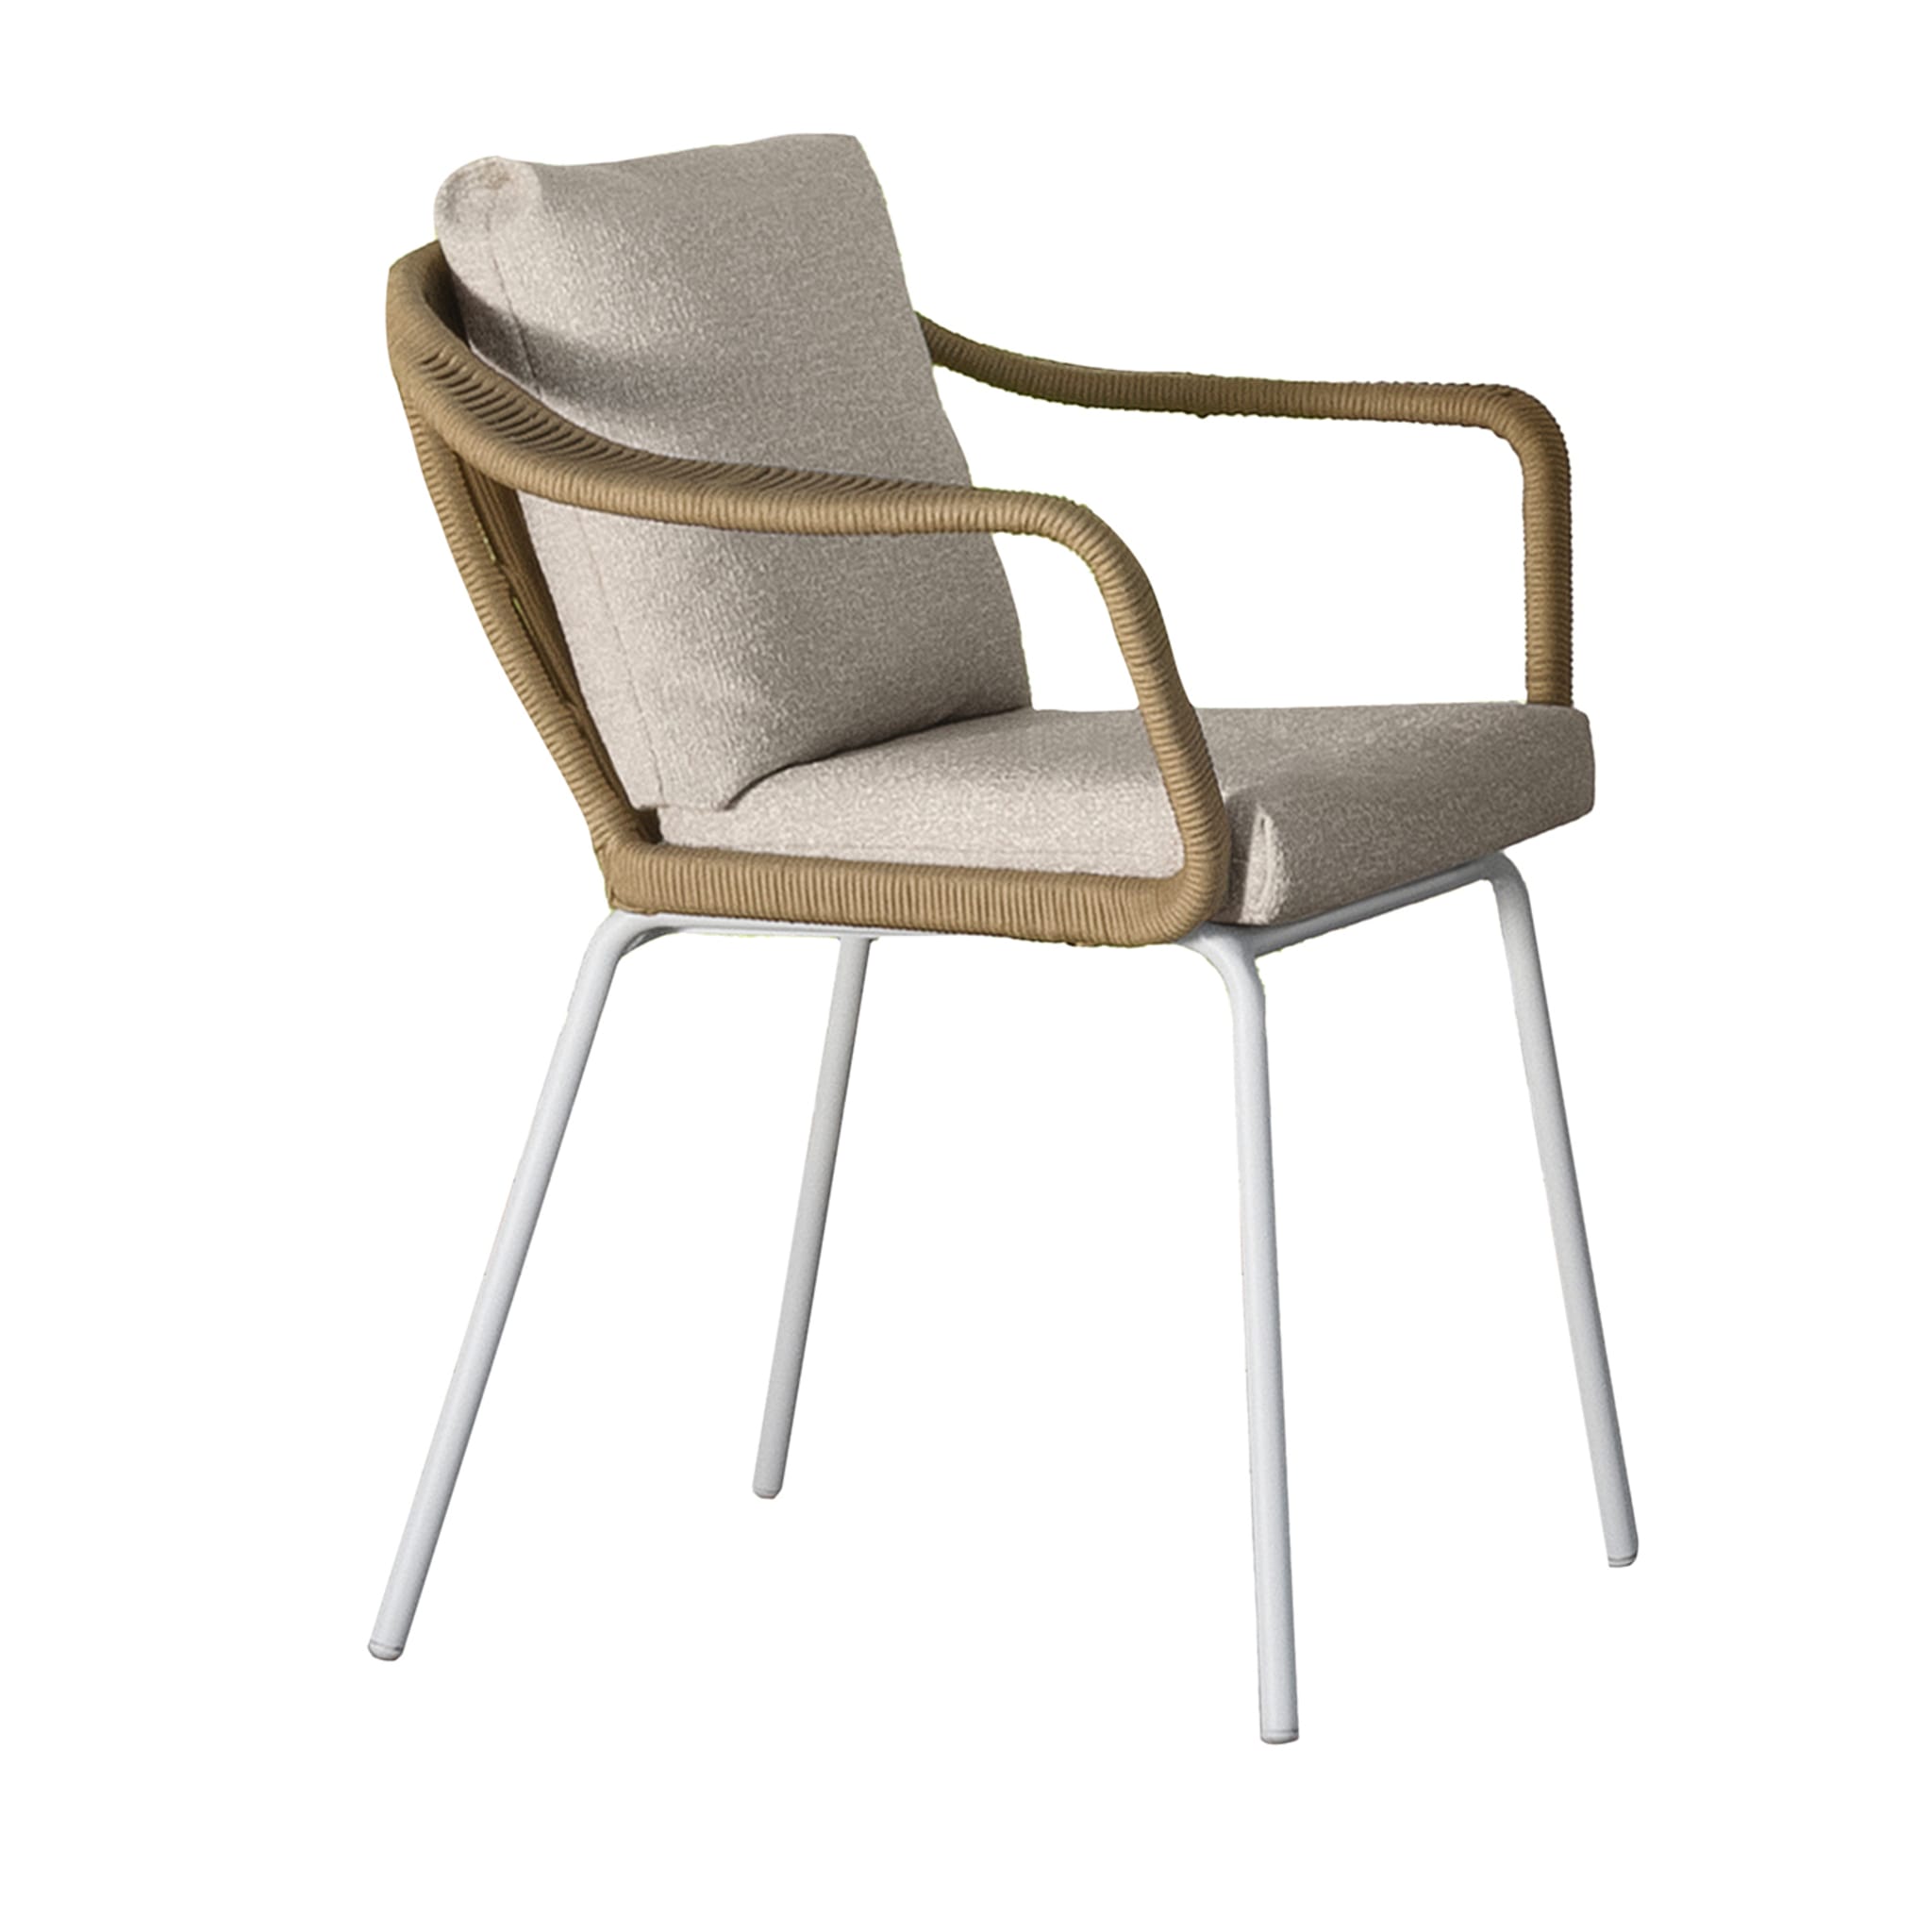 Cruise Alu White Dining Chair by Ludovica & Roberto Palomba - Main view